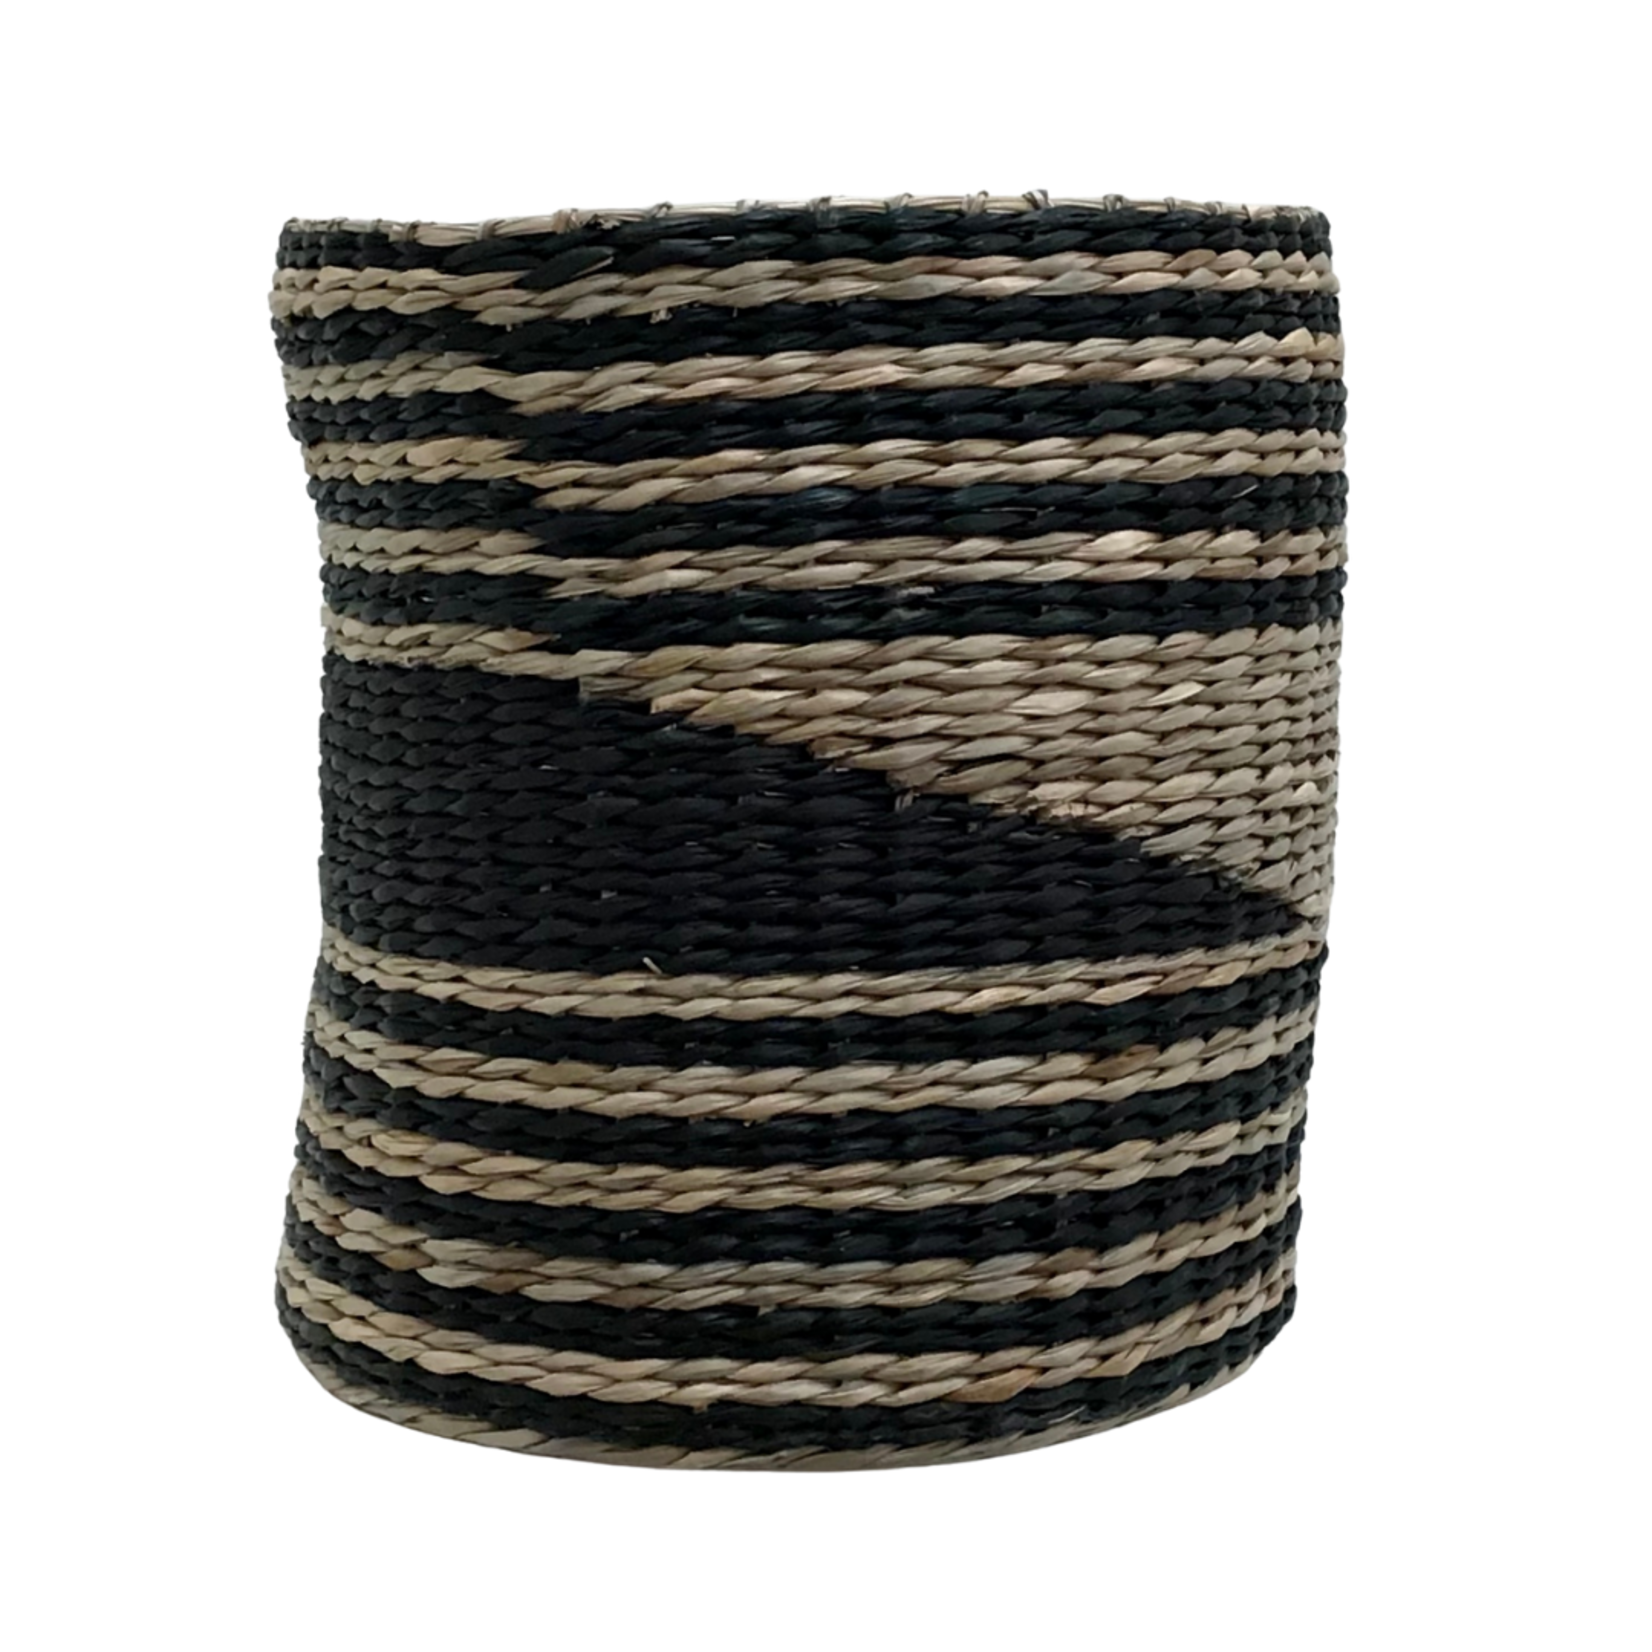 Ten Thousand Villages Basket Seagrass Natural Small